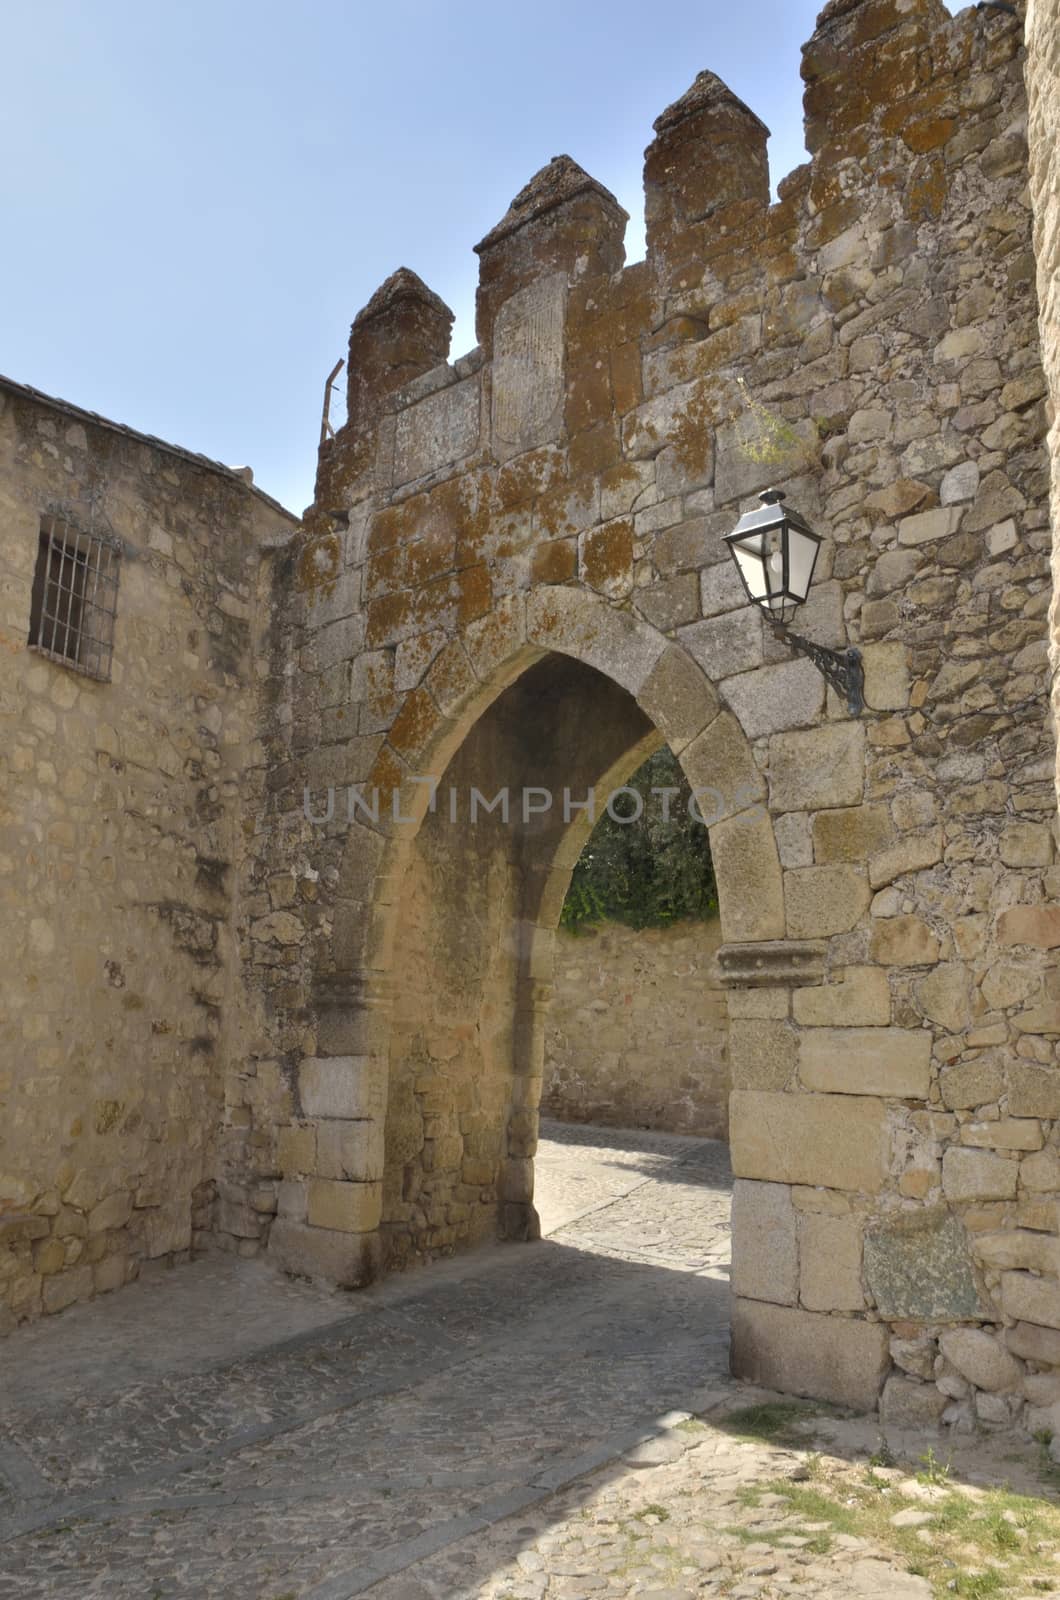 Old Gate in Trujillo, a town in the province of Caceres in Extremadura, Spain.